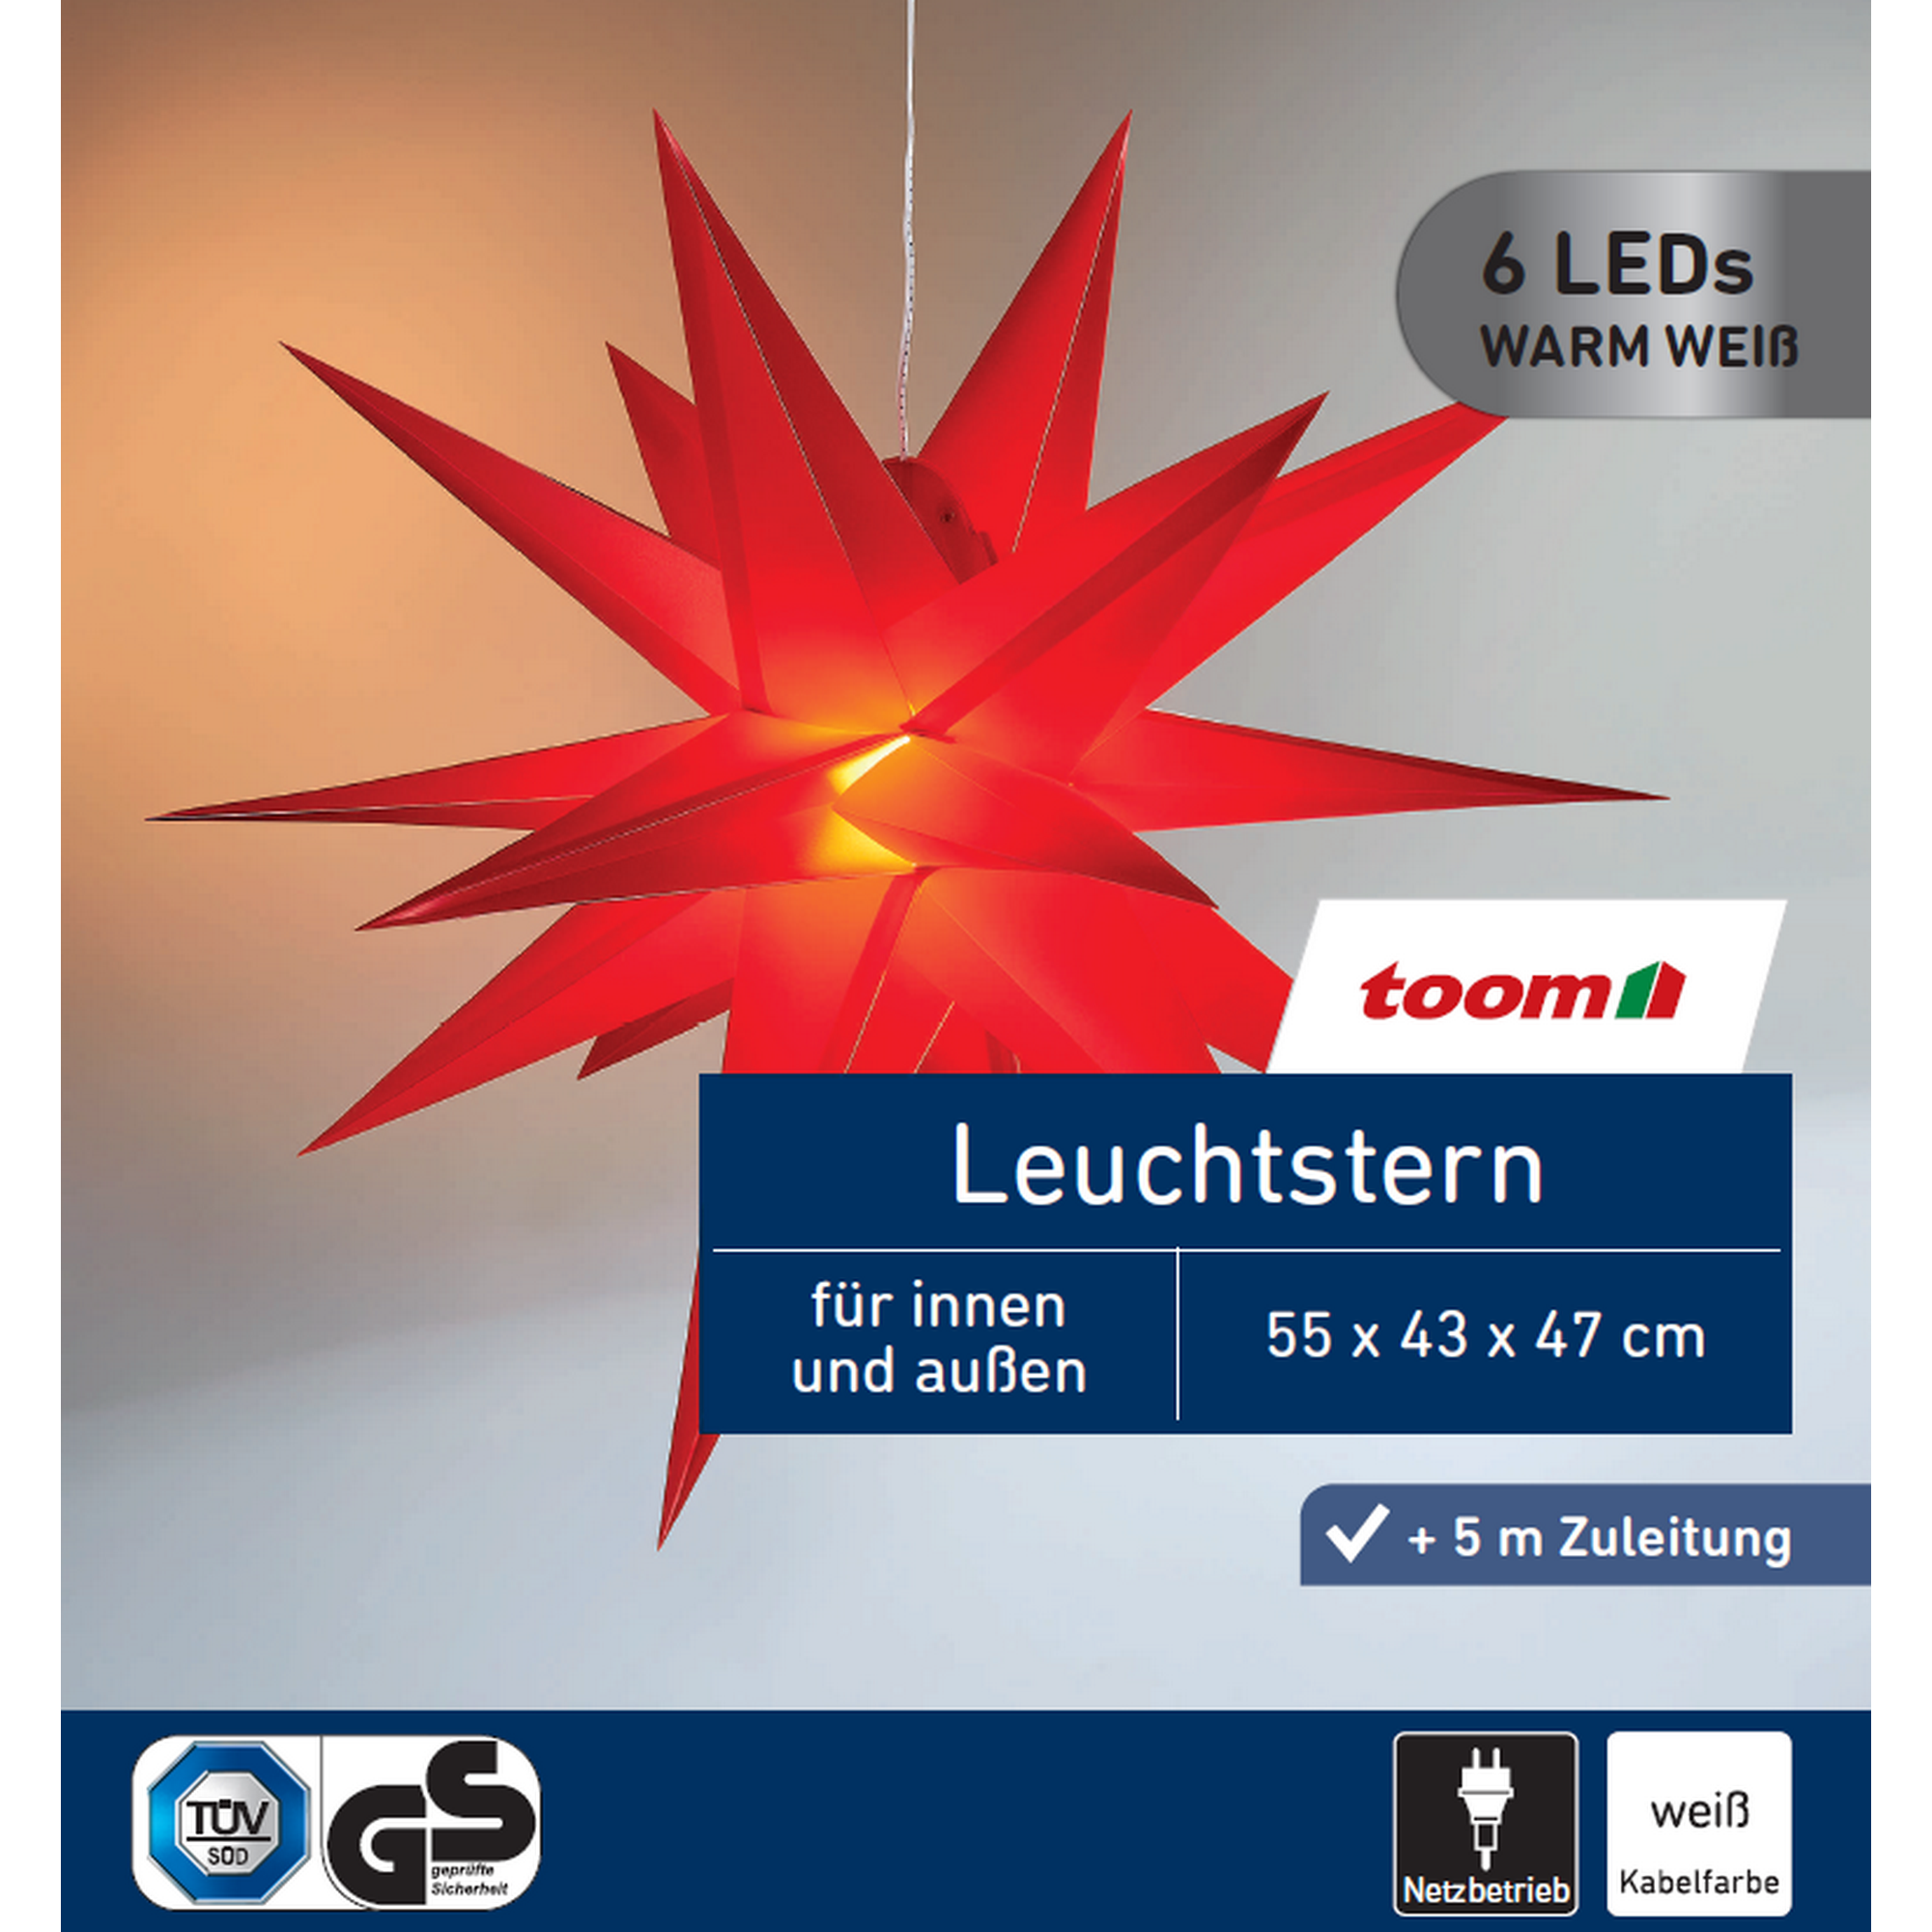 LED-Leuchtstern rot 6 LEDs warmweiß 55 x 43 x 47 cm + product picture